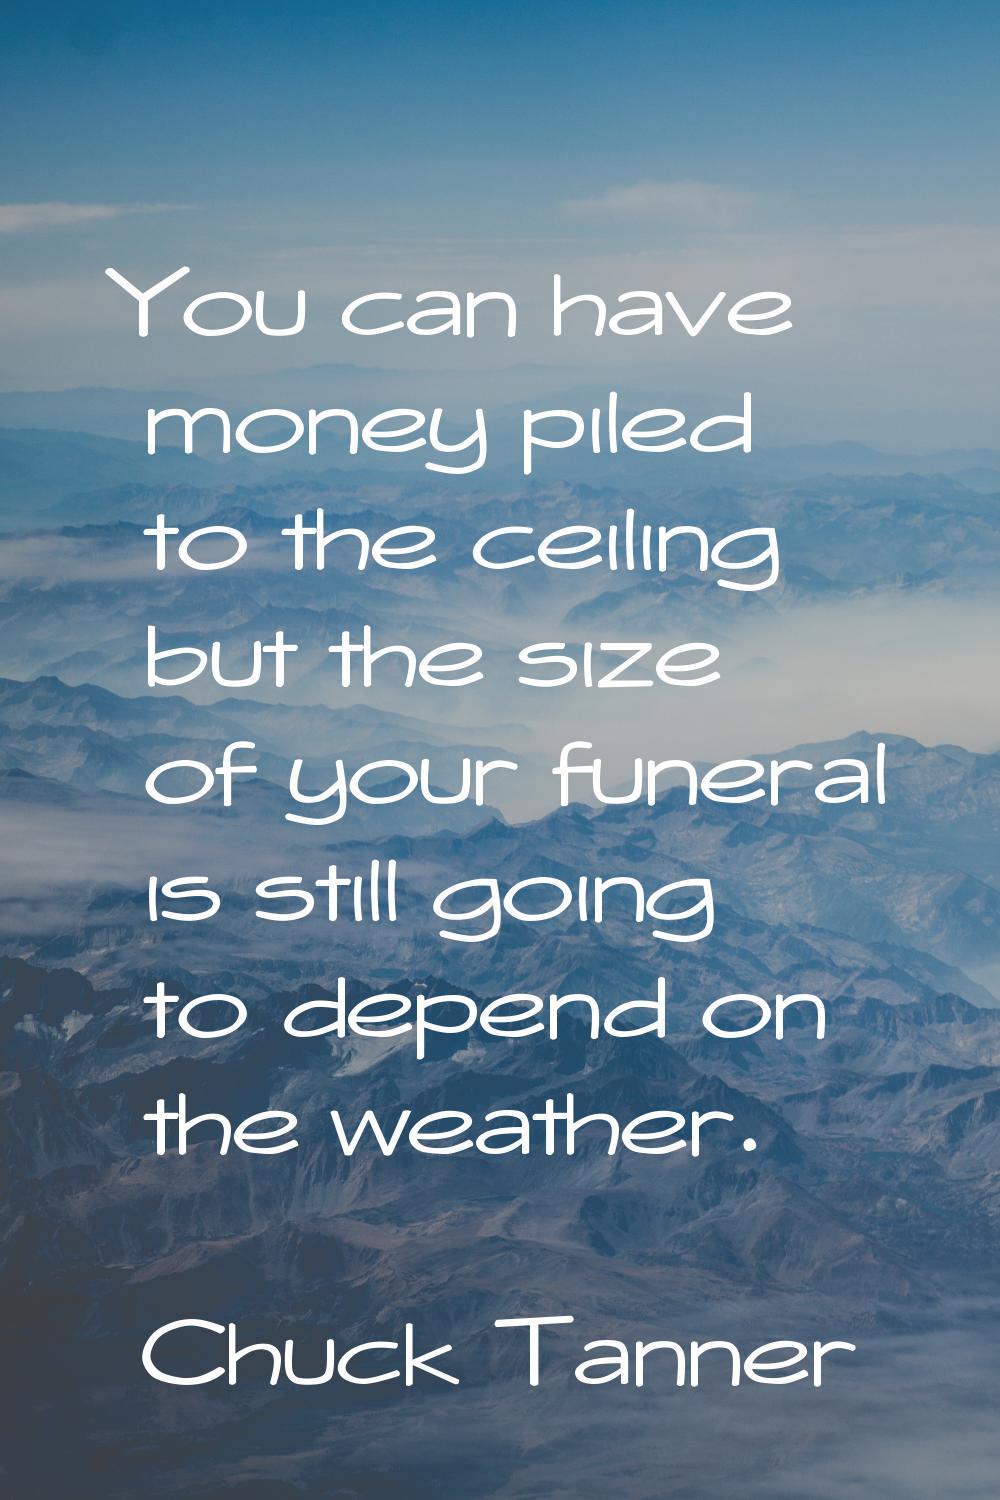 You can have money piled to the ceiling but the size of your funeral is still going to depend on th